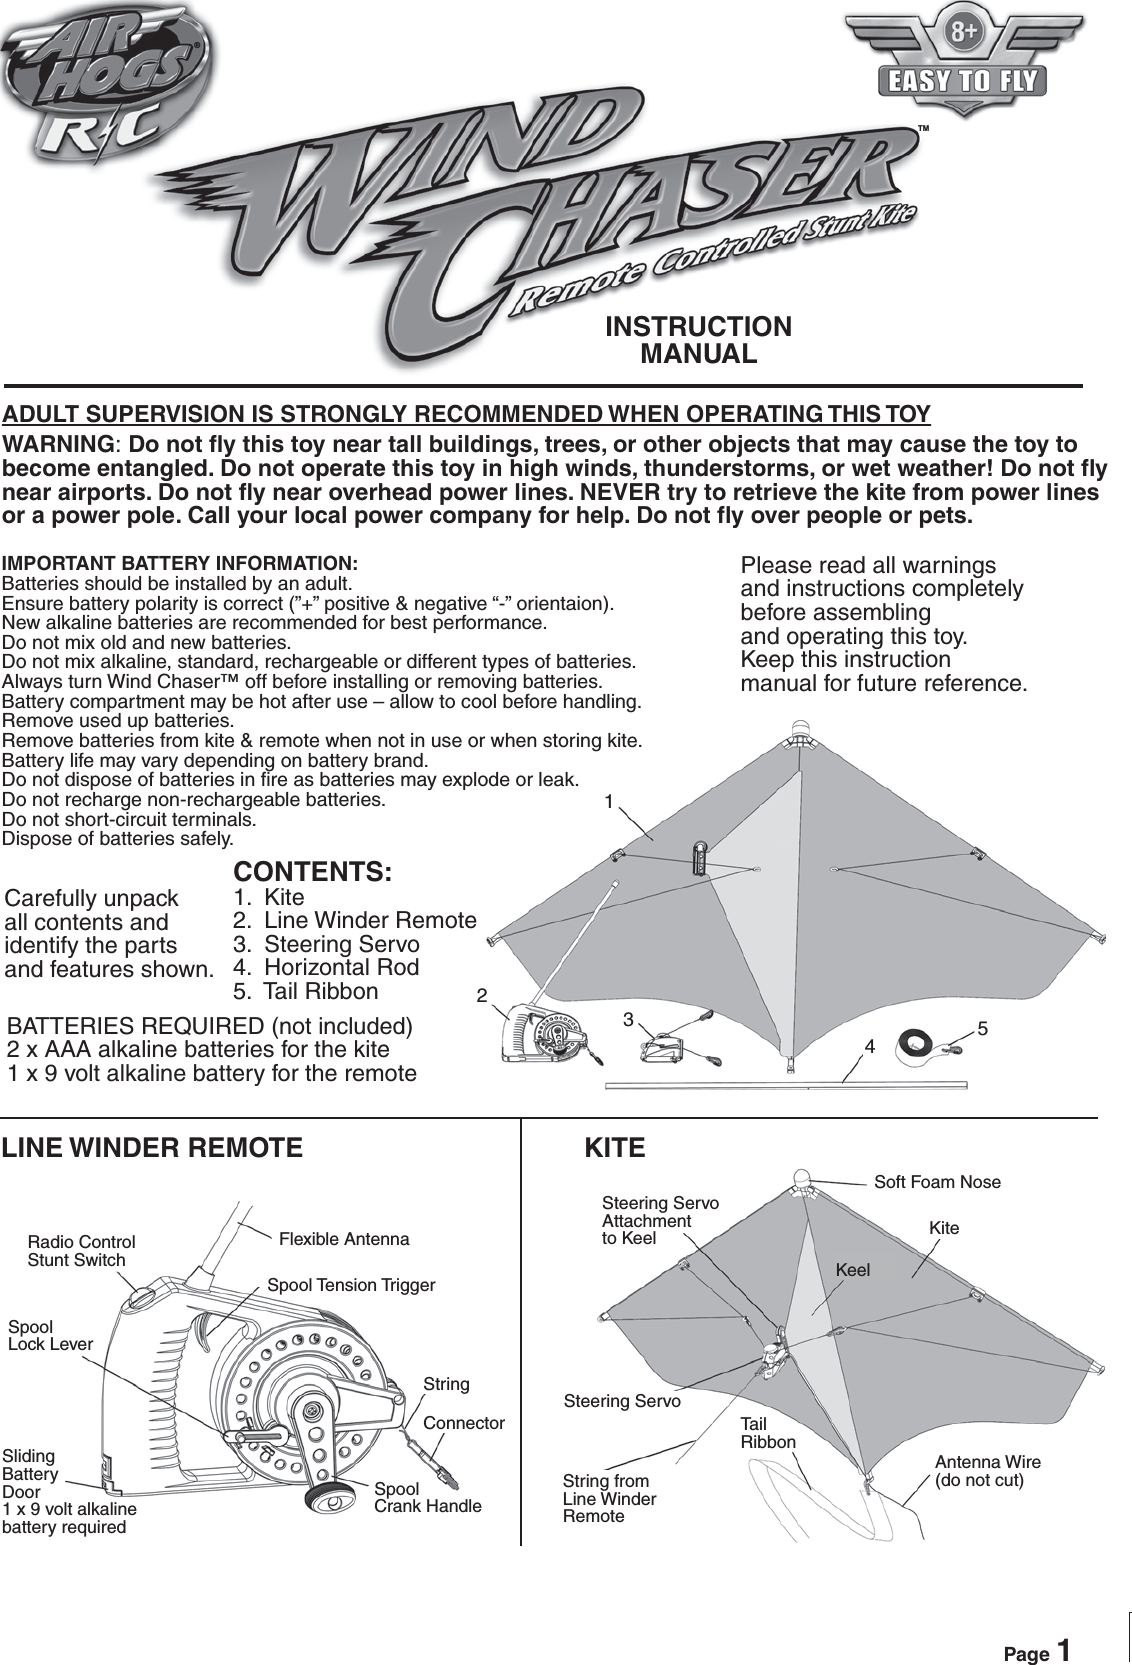 ®TMPlease read all warnings and instructions completelybefore assemblingand operating this toy.Keep this instructionmanual for future reference.BATTERIES REQUIRED (not included)2 x AAA alkaline batteries for the kite1 x 9 volt alkaline battery for the remoteLINE WINDER REMOTE KITECarefully unpackall contents andidentify the parts and features shown.CONTENTS:1.  Kite2.  Line Winder Remote3.  Steering Servo4.  Horizontal Rod5.  Tail RibbonWARNING: Do not fly this toy near tall buildings, trees, or other objects that may cause the toy to become entangled. Do not operate this toy in high winds, thunderstorms, or wet weather! Do not fly near airports. Do not fly near overhead power lines. NEVER try to retrieve the kite from power lines or a power pole. Call your local power company for help. Do not fly over people or pets.IMPORTANT BATTERY INFORMATION:Batteries should be installed by an adult.Ensure battery polarity is correct (”+” positive &amp; negative “-” orientaion).New alkaline batteries are recommended for best performance.Do not mix old and new batteries.Do not mix alkaline, standard, rechargeable or different types of batteries.Always turn Wind Chaser™ off before installing or removing batteries.Battery compartment may be hot after use – allow to cool before handling.Remove used up batteries.Remove batteries from kite &amp; remote when not in use or when storing kite.Battery life may vary depending on battery brand.Do not dispose of batteries in fire as batteries may explode or leak.Do not recharge non-rechargeable batteries.Do not short-circuit terminals.Dispose of batteries safely.ADULT SUPERVISION IS STRONGLY RECOMMENDED WHEN OPERATING THIS TOYPage 1INSTRUCTIONMANUAL12345Radio ControlStunt SwitchSpoolLock LeverSlidingBatteryDoor1 x 9 volt alkalinebattery requiredFlexible AntennaSpool Tension TriggerStringConnectorSpoolCrank HandleSteering Servo Attachmentto KeelSteering ServoString from Line Winder RemoteTailRibbonAntenna Wire(do not cut)Soft Foam NoseKiteKeel